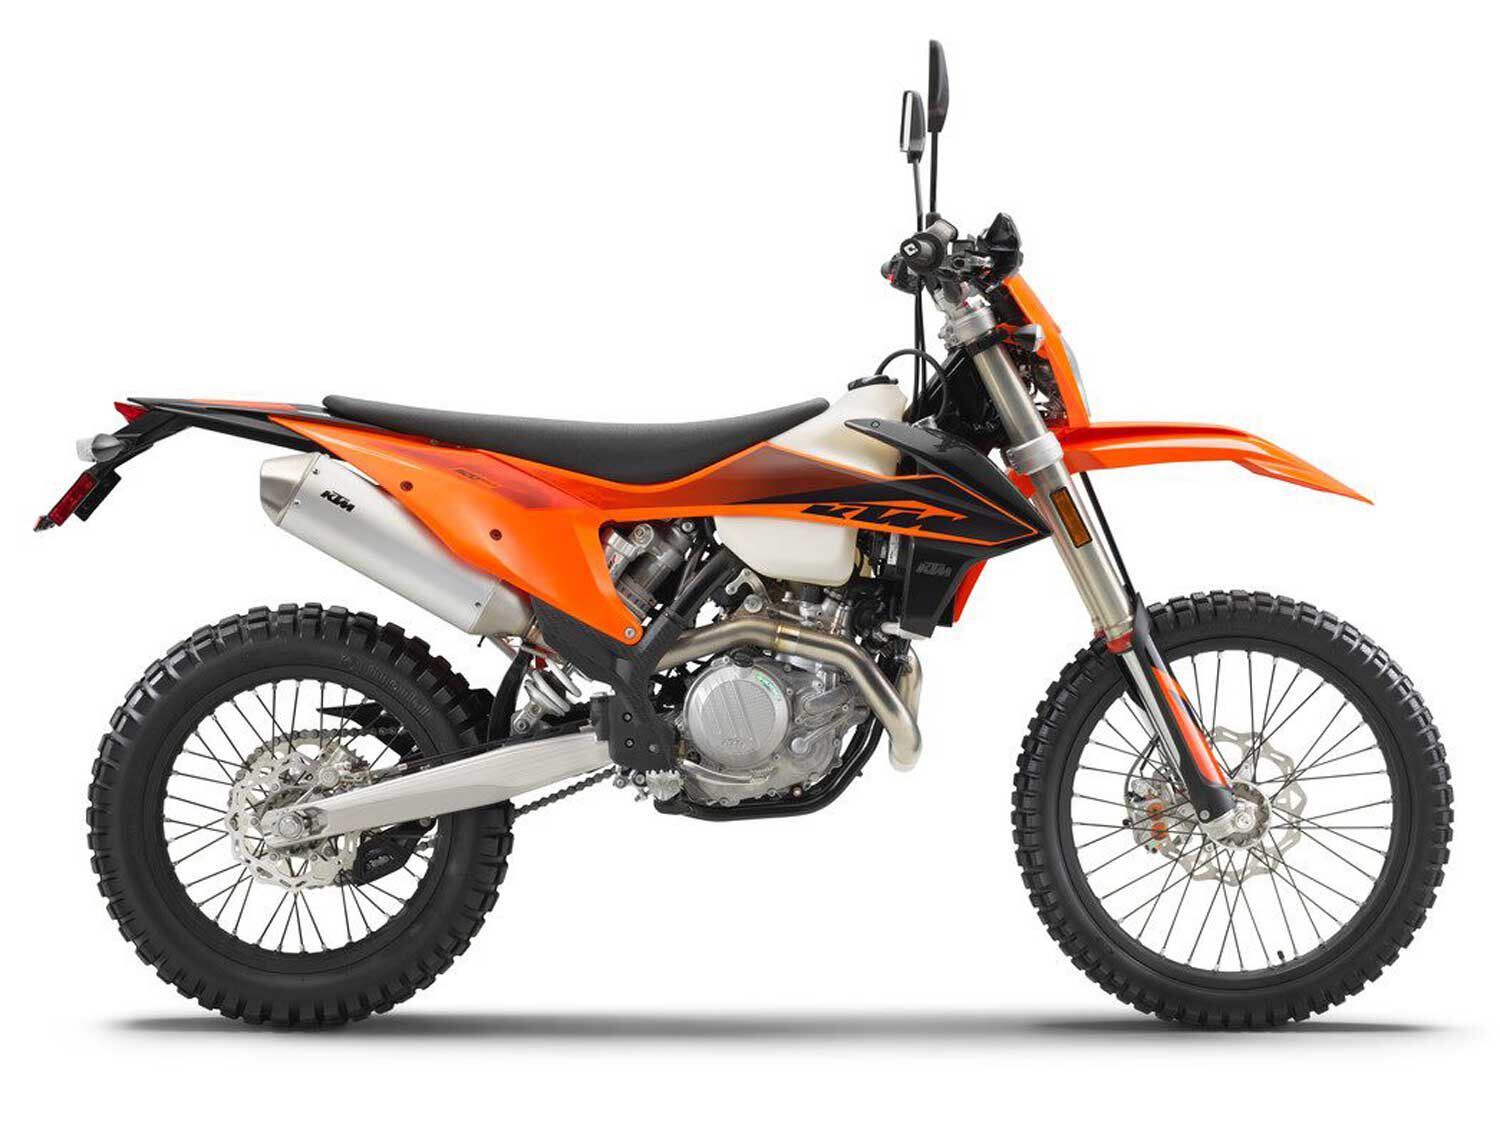 The Best Dual Sport Motorcycles For Sale In 2020 The Dirt Bike Mx Off Road Forums Dirtrider